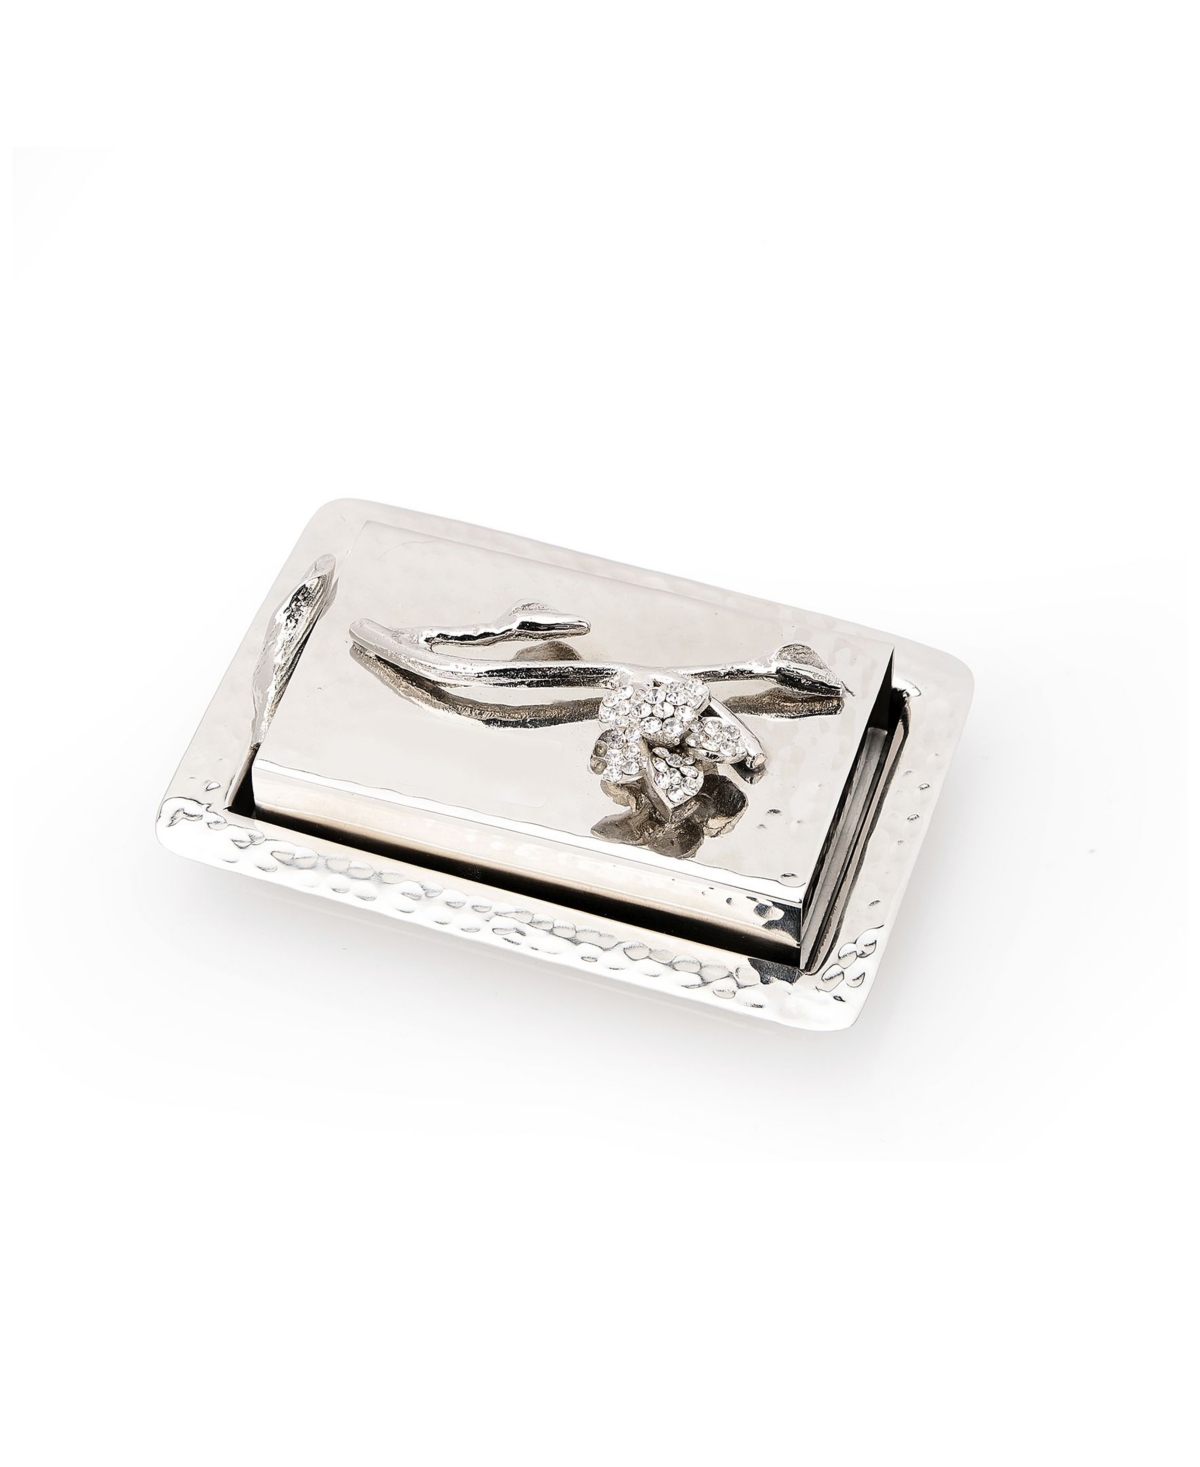 Classic Touch Match Box With Jeweled Flower In Silver - Tone